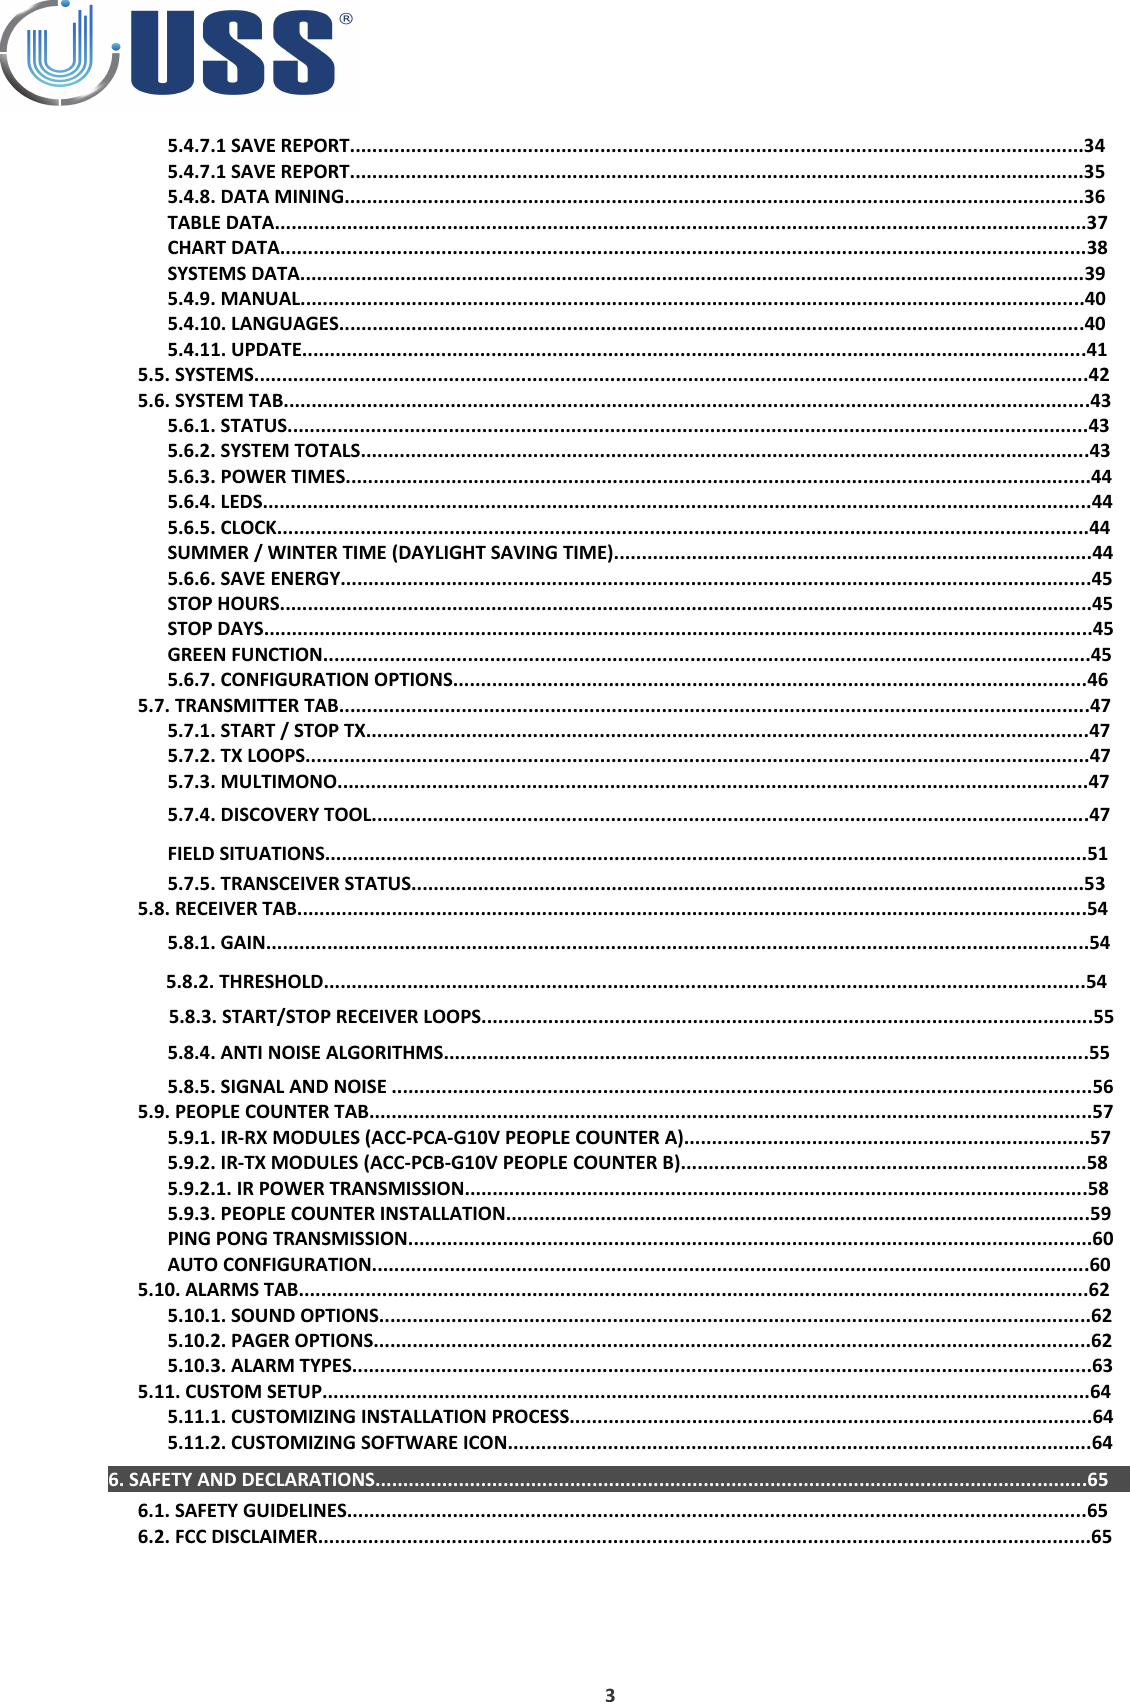 5.4.7.1 SAVE REPORT....................................................................................................................................345.4.7.1 SAVE REPORT....................................................................................................................................355.4.8. DATA MINING.....................................................................................................................................36TABLE DATA..................................................................................................................................................37CHART DATA.................................................................................................................................................38SYSTEMS DATA.............................................................................................................................................395.4.9. MANUAL.............................................................................................................................................405.4.10. LANGUAGES......................................................................................................................................405.4.11. UPDATE.............................................................................................................................................415.5. SYSTEMS......................................................................................................................................................425.6. SYSTEM TAB.................................................................................................................................................435.6.1. STATUS................................................................................................................................................435.6.2. SYSTEM TOTALS...................................................................................................................................435.6.3. POWER TIMES......................................................................................................................................445.6.4. LEDS.....................................................................................................................................................44 5.6.5. CLOCK..................................................................................................................................................44SUMMER / WINTER TIME (DAYLIGHT SAVING TIME)......................................................................................445.6.6. SAVE ENERGY.......................................................................................................................................45STOP HOURS..................................................................................................................................................45STOP DAYS.....................................................................................................................................................45GREEN FUNCTION..........................................................................................................................................455.6.7. CONFIGURATION OPTIONS..................................................................................................................465.7. TRANSMITTER TAB.......................................................................................................................................475.7.1. START / STOP TX..................................................................................................................................475.7.2. TX LOOPS.............................................................................................................................................475.7.3. MULTIMONO.......................................................................................................................................475.7.4. DISCOVERY TOOL.................................................................................................................................47FIELD SITUATIONS.........................................................................................................................................515.7.5. TRANSCEIVER STATUS.........................................................................................................................535.8. RECEIVER TAB..............................................................................................................................................545.8.1. GAIN....................................................................................................................................................545.8.2. THRESHOLD.........................................................................................................................................545.8.3. START/STOP RECEIVER LOOPS..............................................................................................................555.8.4. ANTI NOISE ALGORITHMS....................................................................................................................555.8.5. SIGNAL AND NOISE ..............................................................................................................................565.9. PEOPLE COUNTER TAB..................................................................................................................................575.9.1. IR-RX MODULES (ACC-PCA-G10V PEOPLE COUNTER A).........................................................................575.9.2. IR-TX MODULES (ACC-PCB-G10V PEOPLE COUNTER B).........................................................................585.9.2.1. IR POWER TRANSMISSION................................................................................................................585.9.3. PEOPLE COUNTER INSTALLATION.........................................................................................................59PING PONG TRANSMISSION...........................................................................................................................60AUTO CONFIGURATION.................................................................................................................................605.10. ALARMS TAB..............................................................................................................................................625.10.1. SOUND OPTIONS................................................................................................................................625.10.2. PAGER OPTIONS.................................................................................................................................625.10.3. ALARM TYPES.....................................................................................................................................635.11. CUSTOM SETUP..........................................................................................................................................645.11.1. CUSTOMIZING INSTALLATION PROCESS..............................................................................................645.11.2. CUSTOMIZING SOFTWARE ICON.........................................................................................................646. SAFETY AND DECLARATIONS................................................................................................................................656.1. SAFETY GUIDELINES.....................................................................................................................................656.2. FCC DISCLAIMER...........................................................................................................................................653